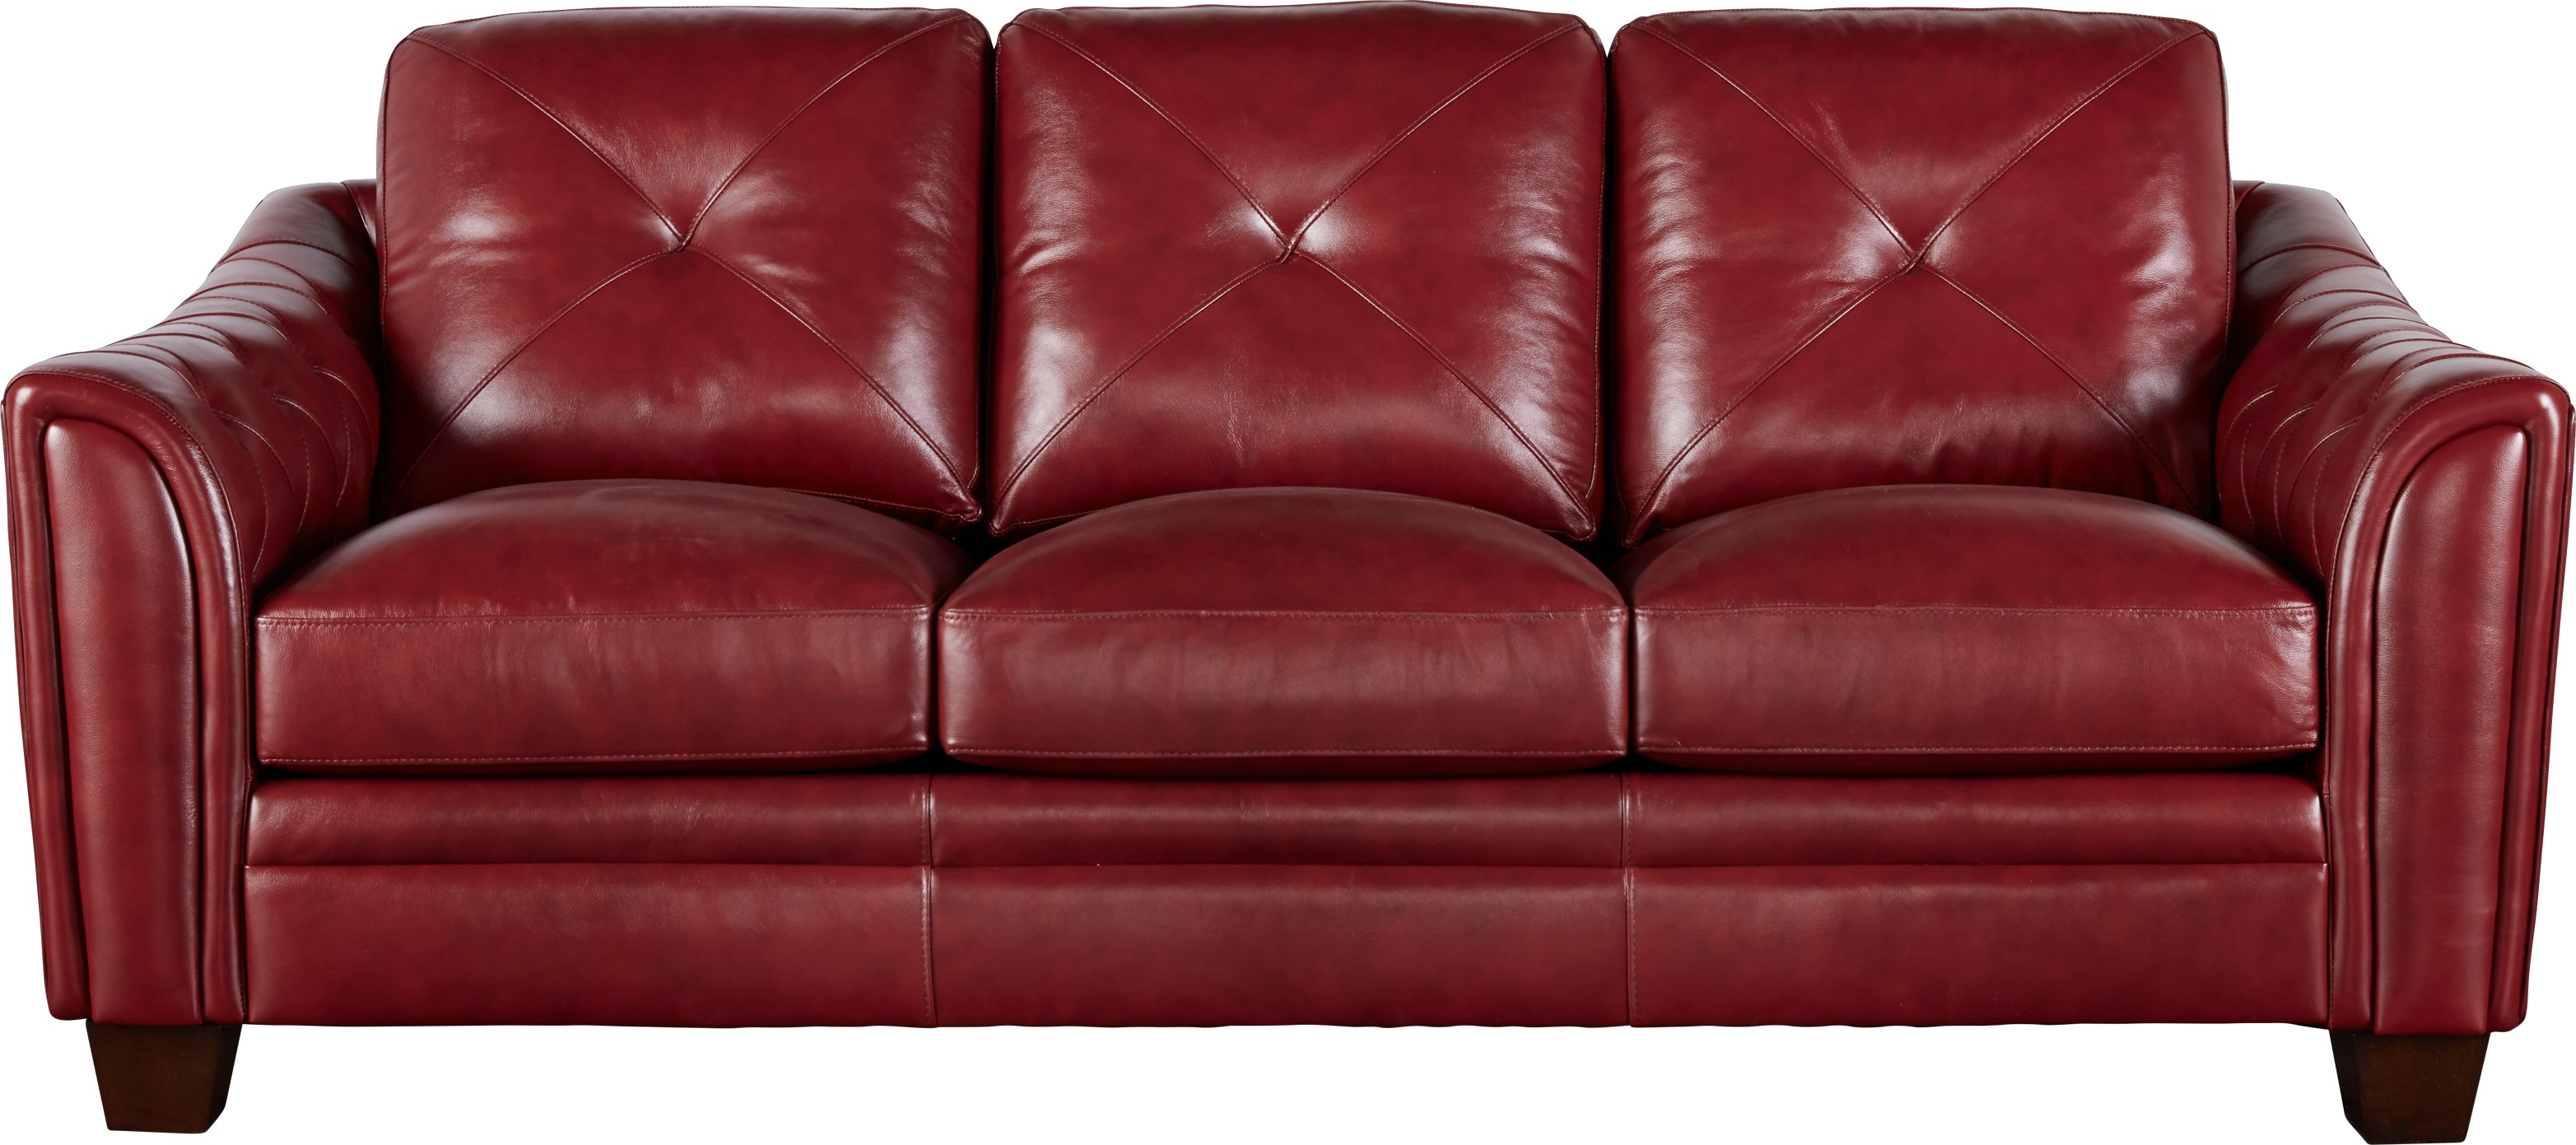 red leather sofa scan design